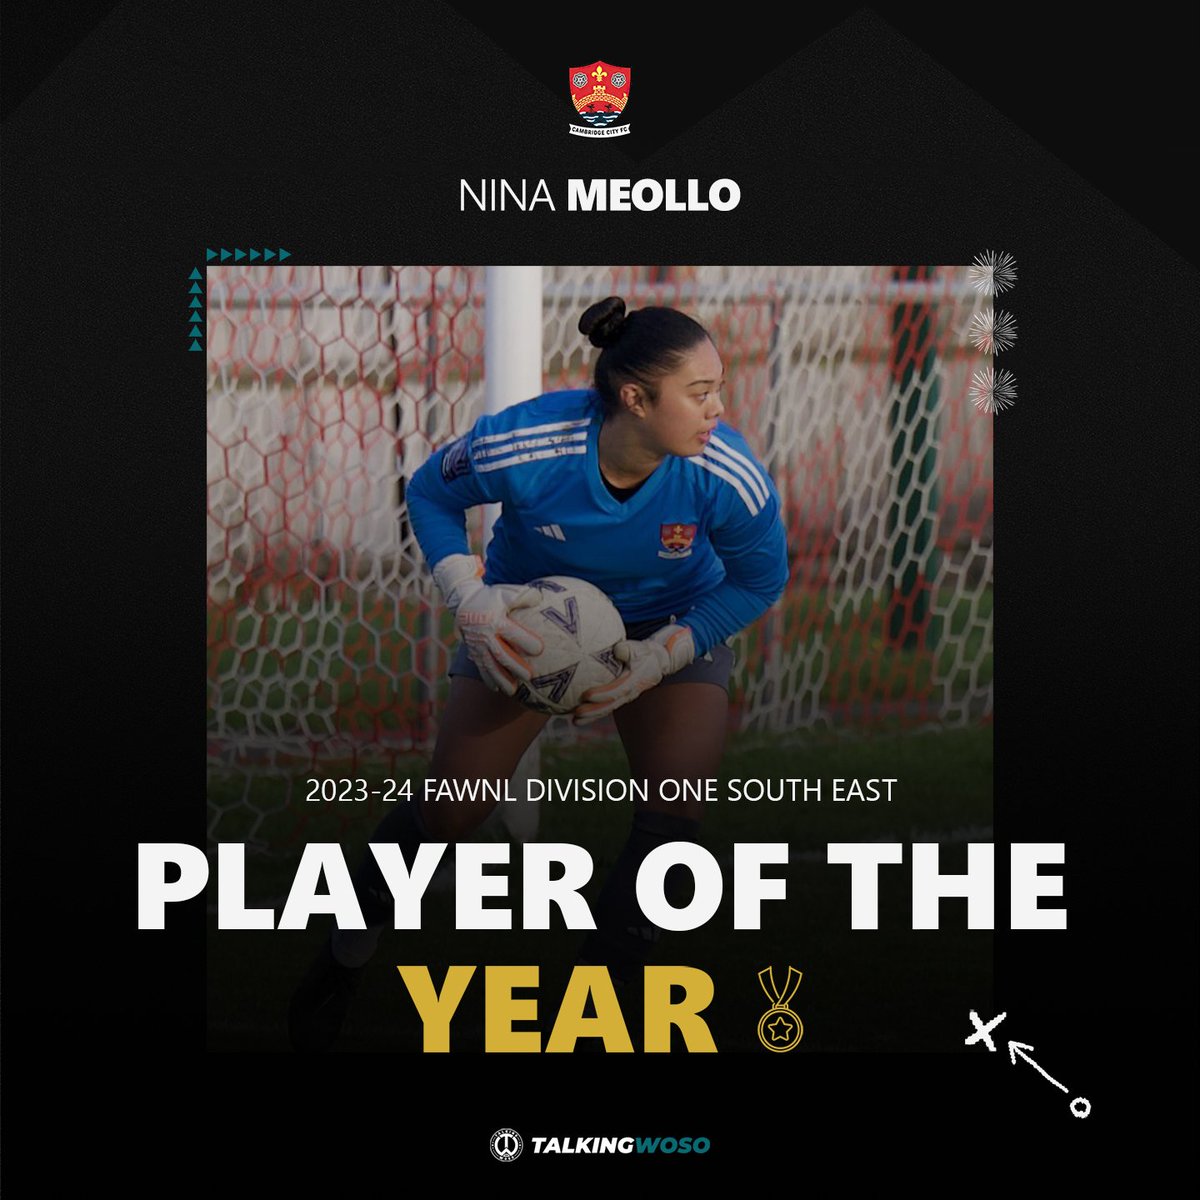 The 2023-24 FAWNL Division One South East Player of the Year... Nina Meollo. Meollo, whose performances earned her first international call-up for the Philippines, received the most Opposition Player of the Match awards in division to scoop the award. 📸 @cambscitygirls